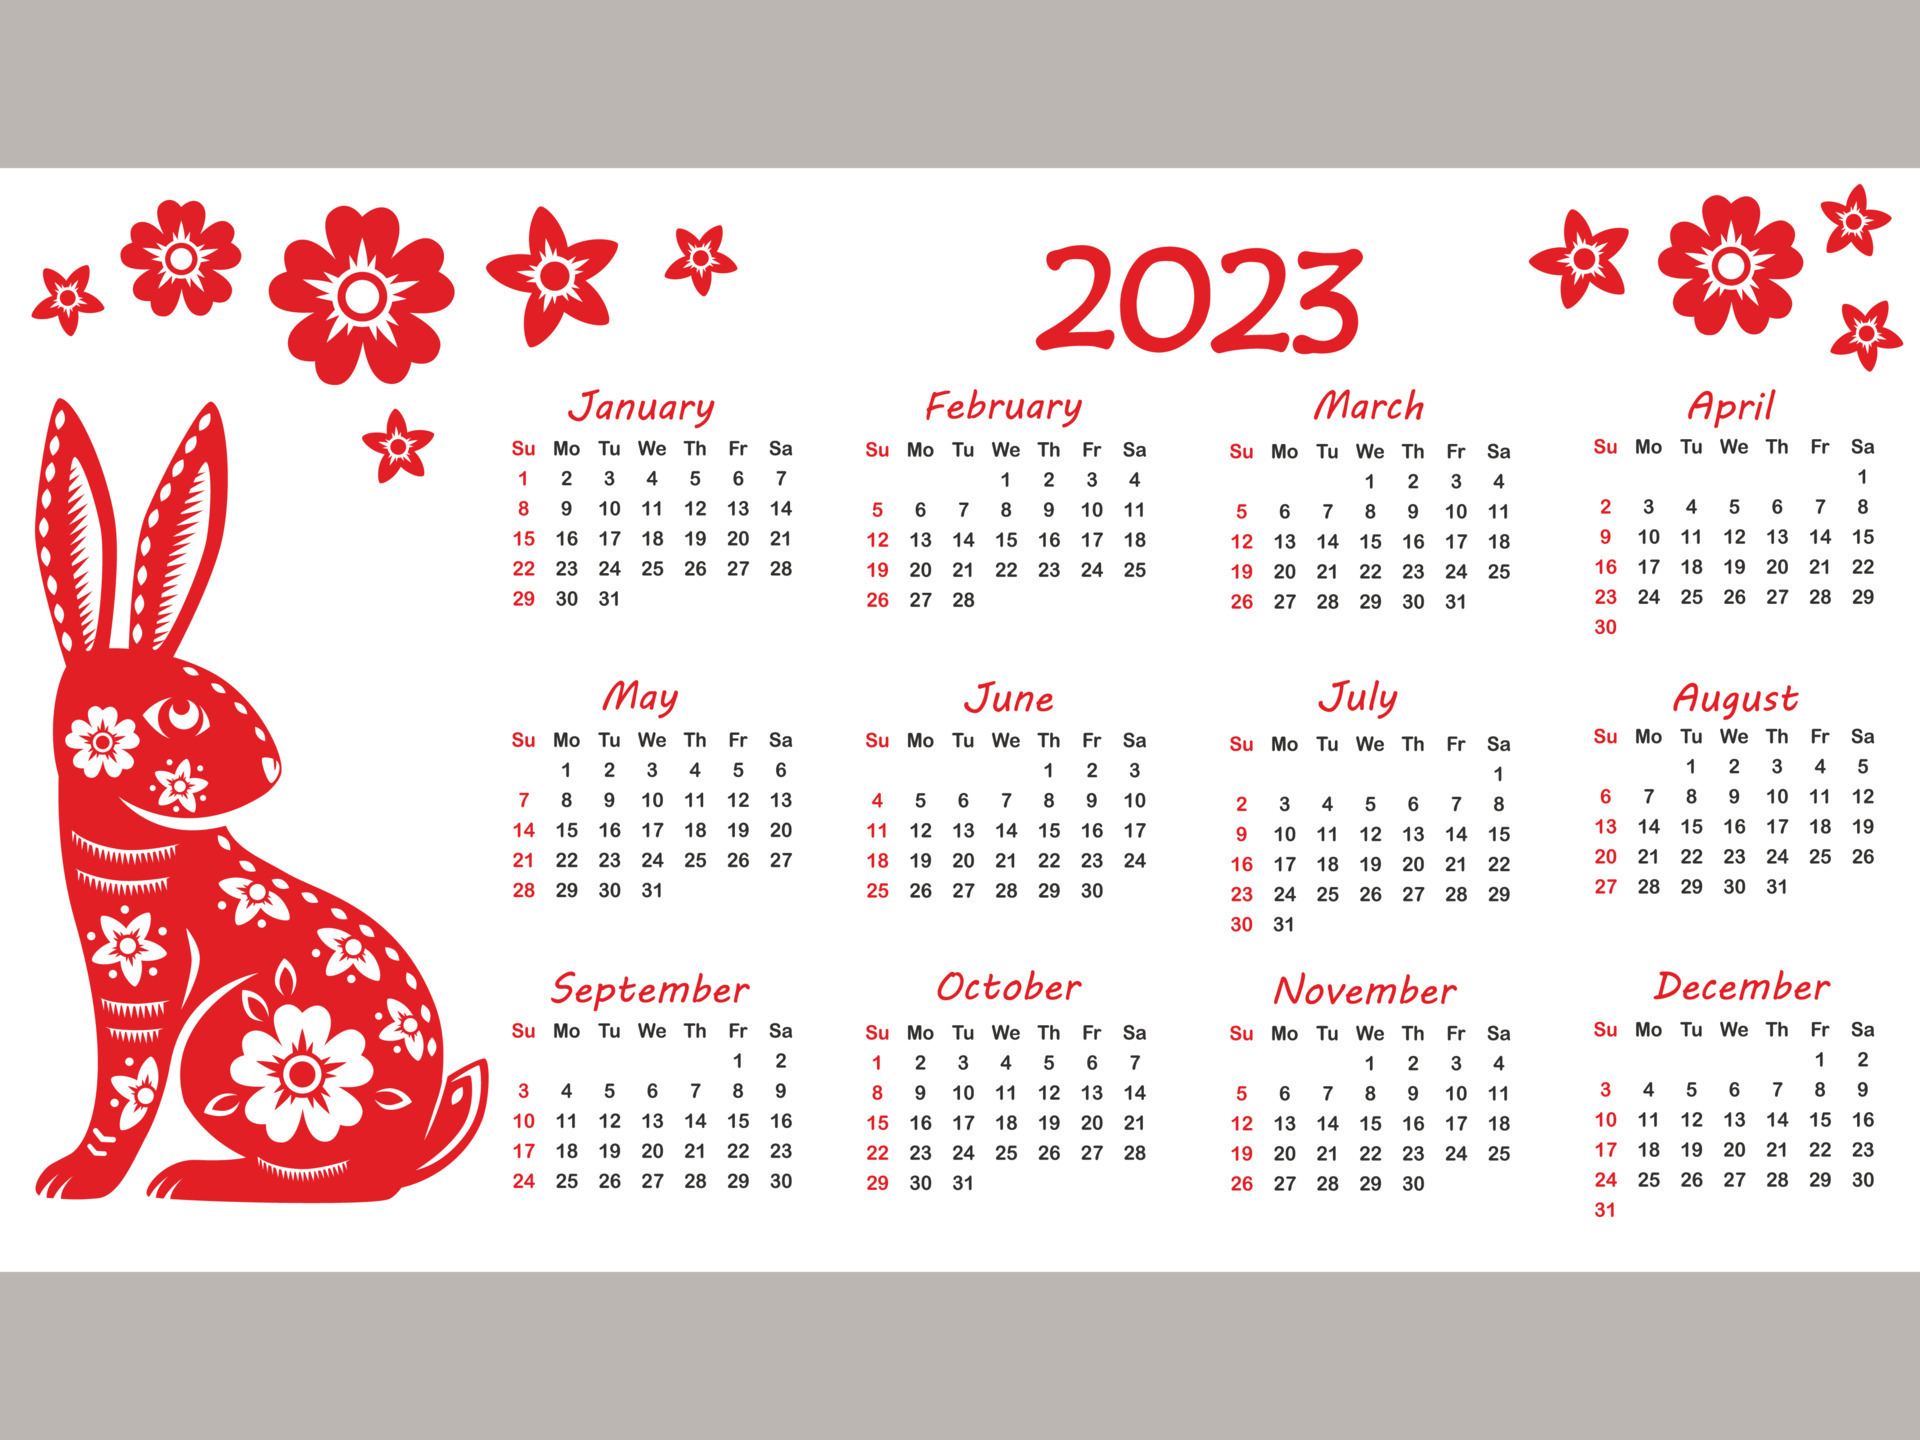 Calendar 2023 with zodiac sign, year of the Rabbit, with red paper cut art on white color background